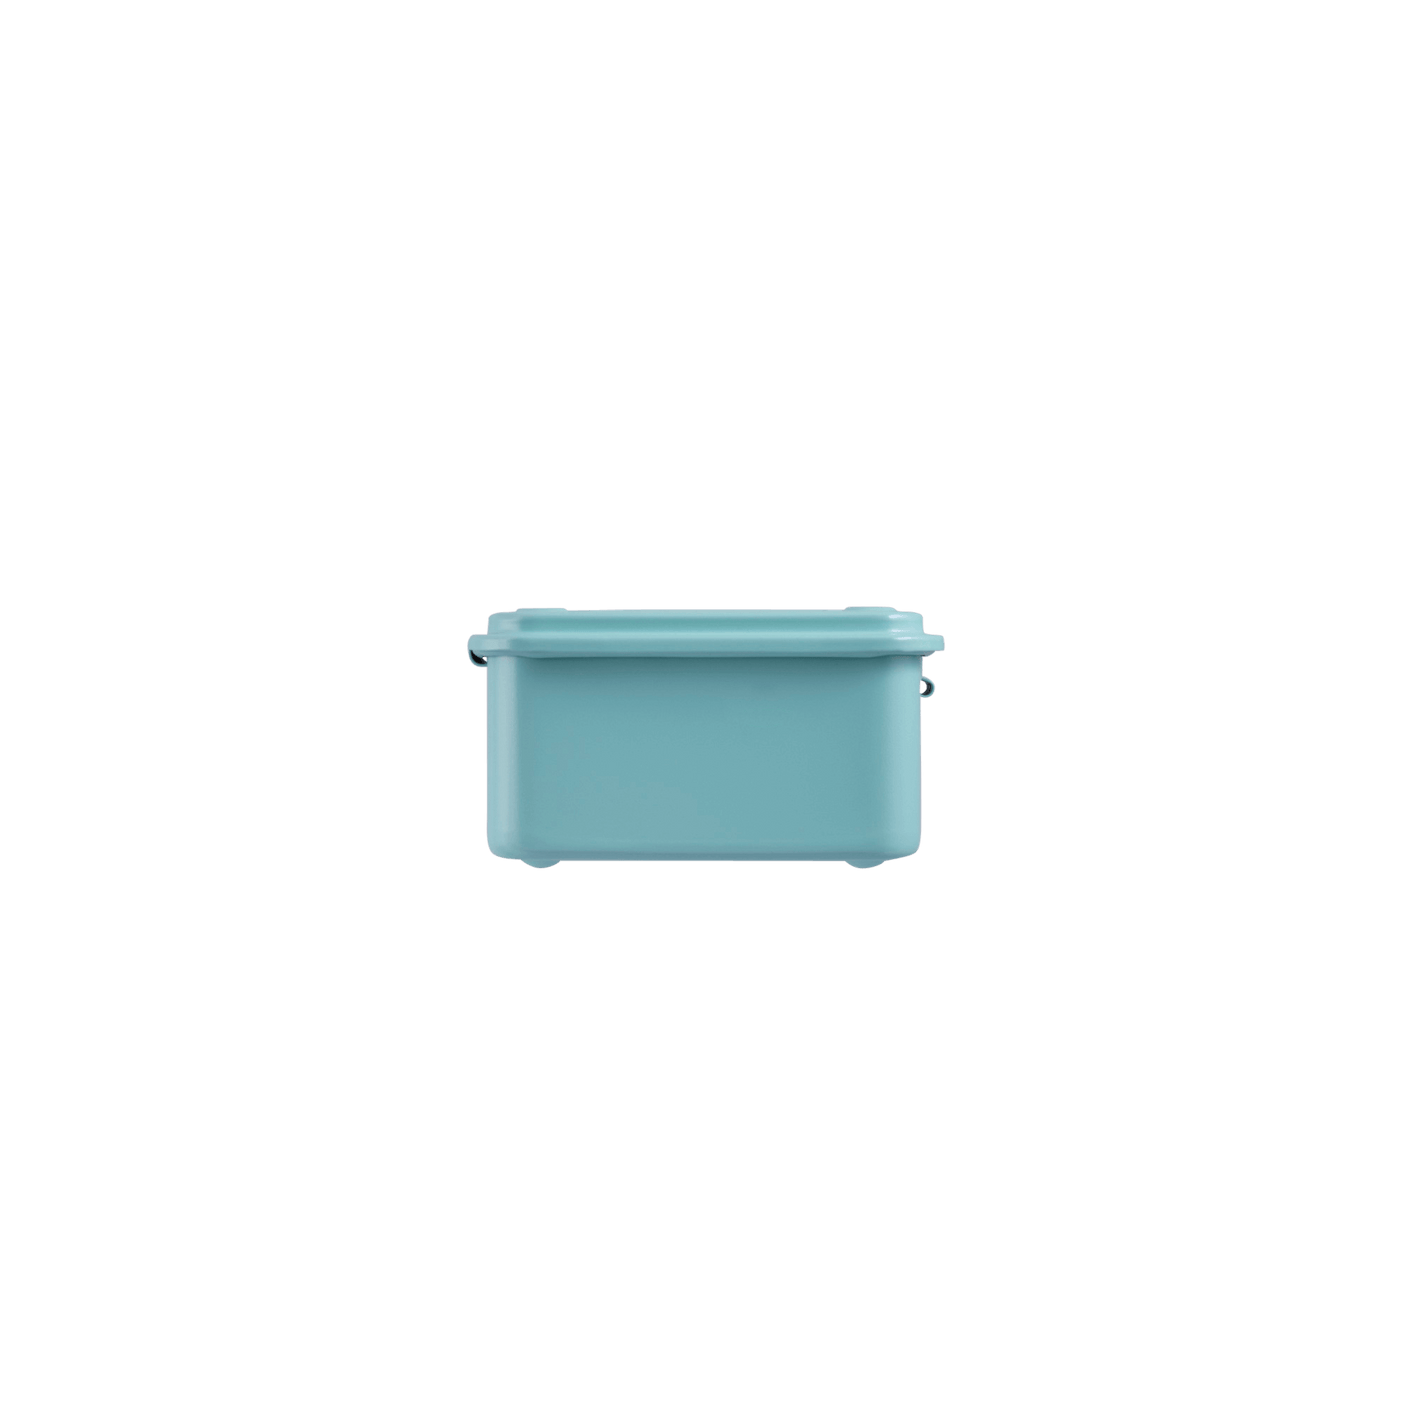 TOYO Trunk Shape Toolbox T-190 SE (Summer emerald green) - Tool Bags Boxes and Rolls - Japanese Tools Australia